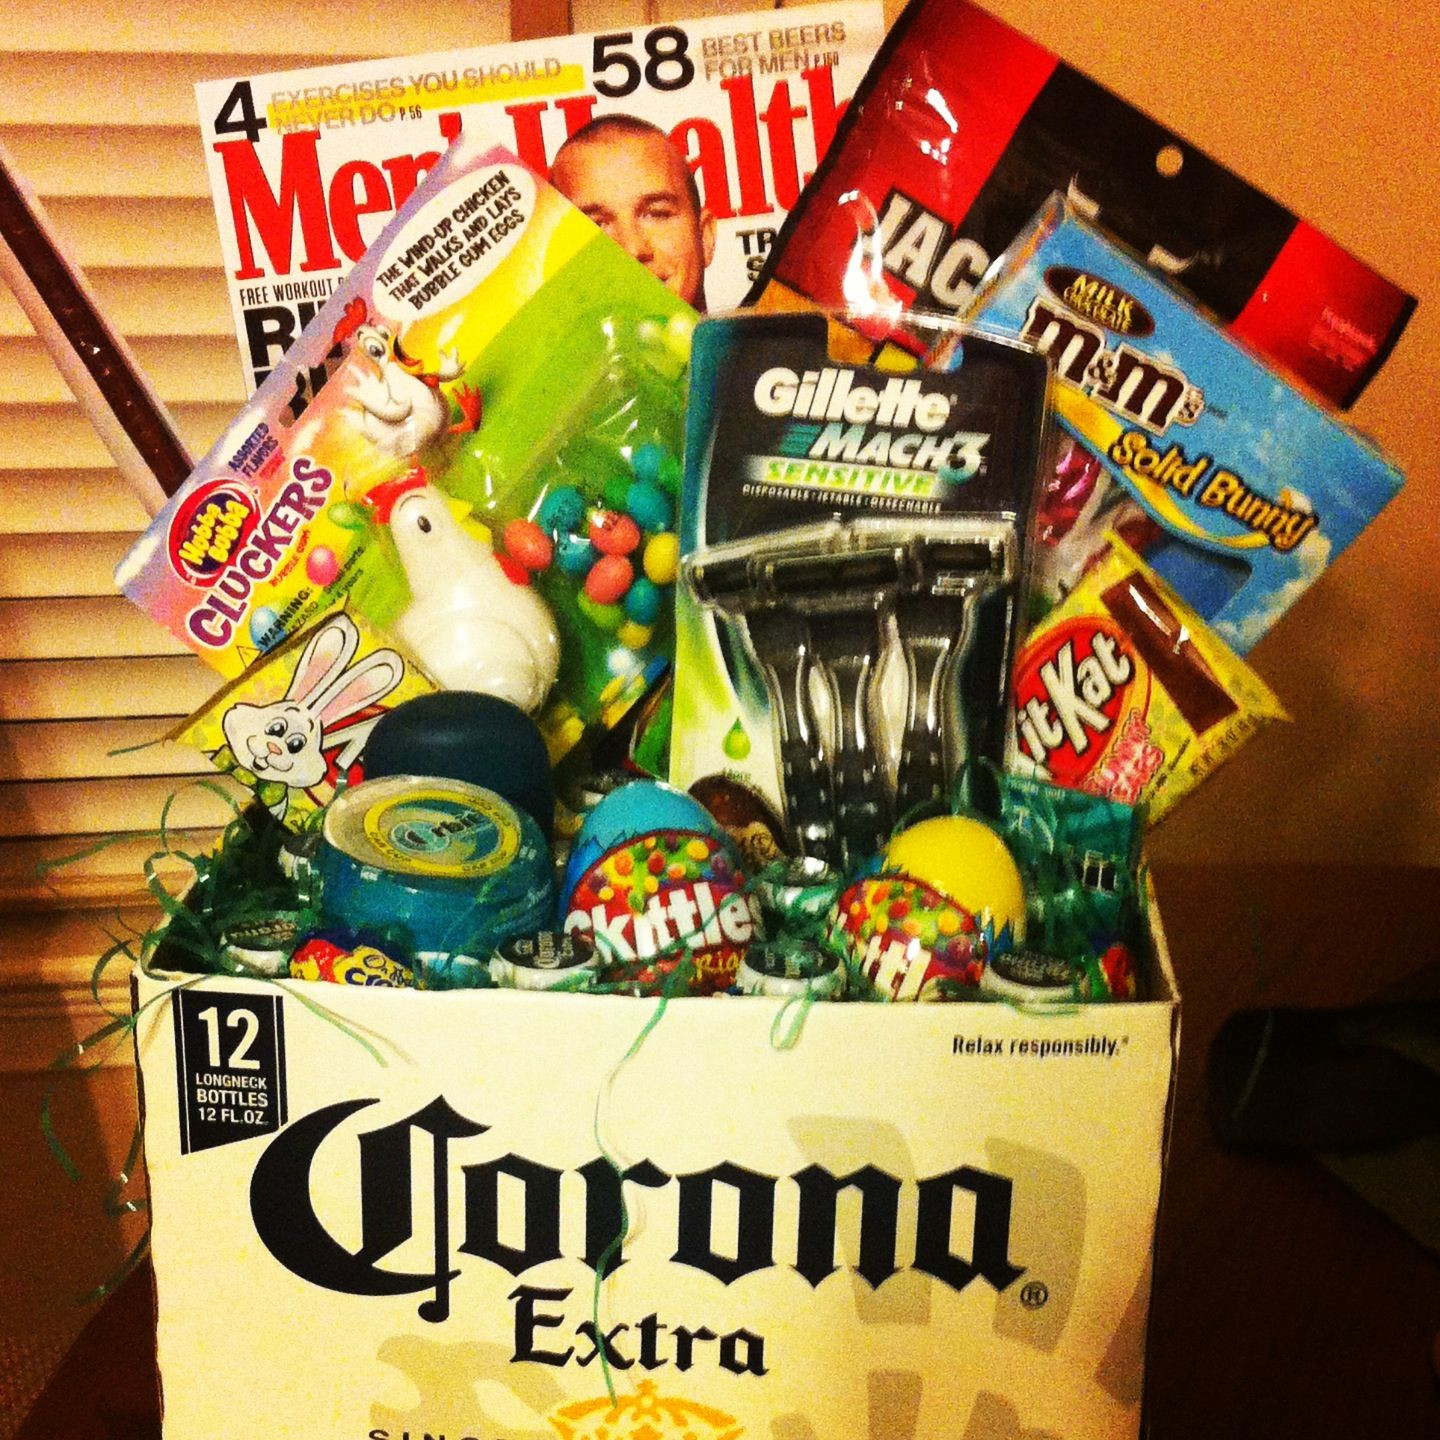 Easter Basket Ideas For Boyfriend
 Made this Easter basket for my boyfriend So easy and a